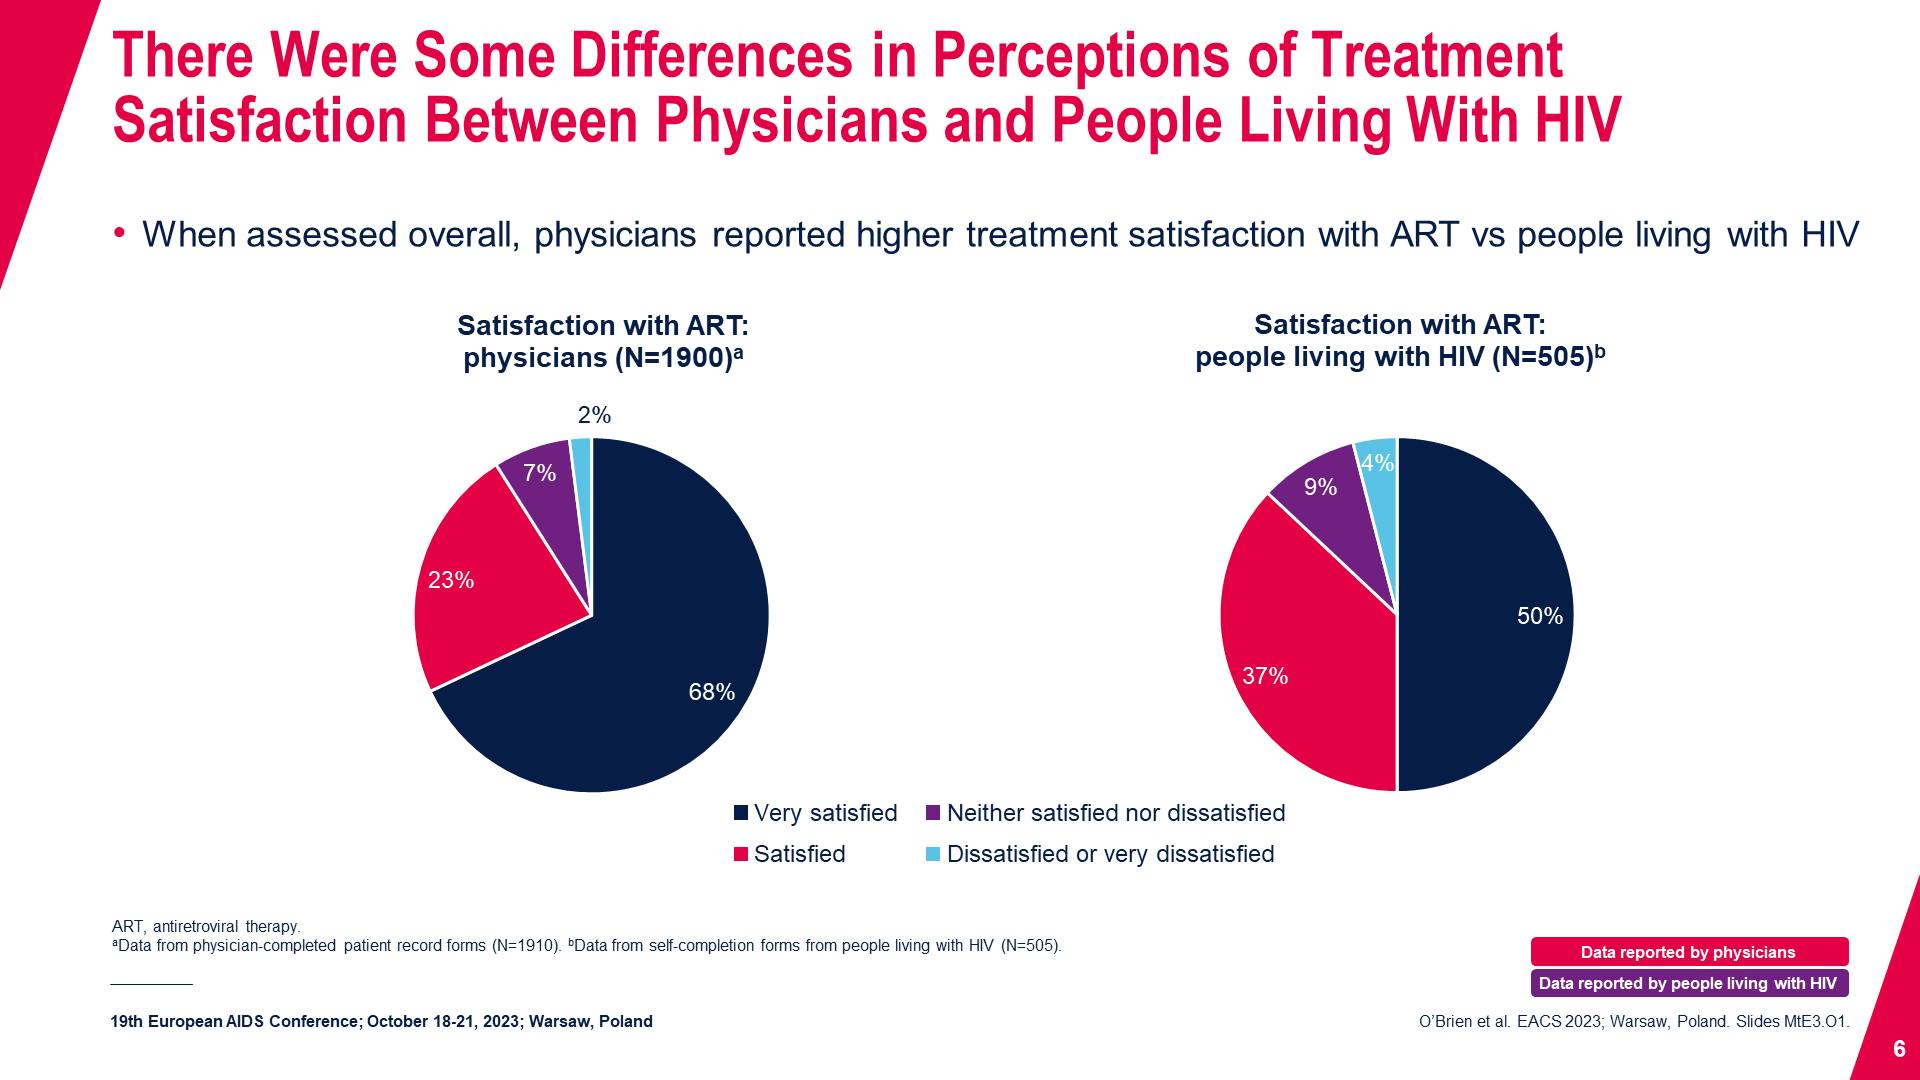 There Were Some Differences in Perceptions of Treatment Satisfaction Between Physicians and People Living With HIV